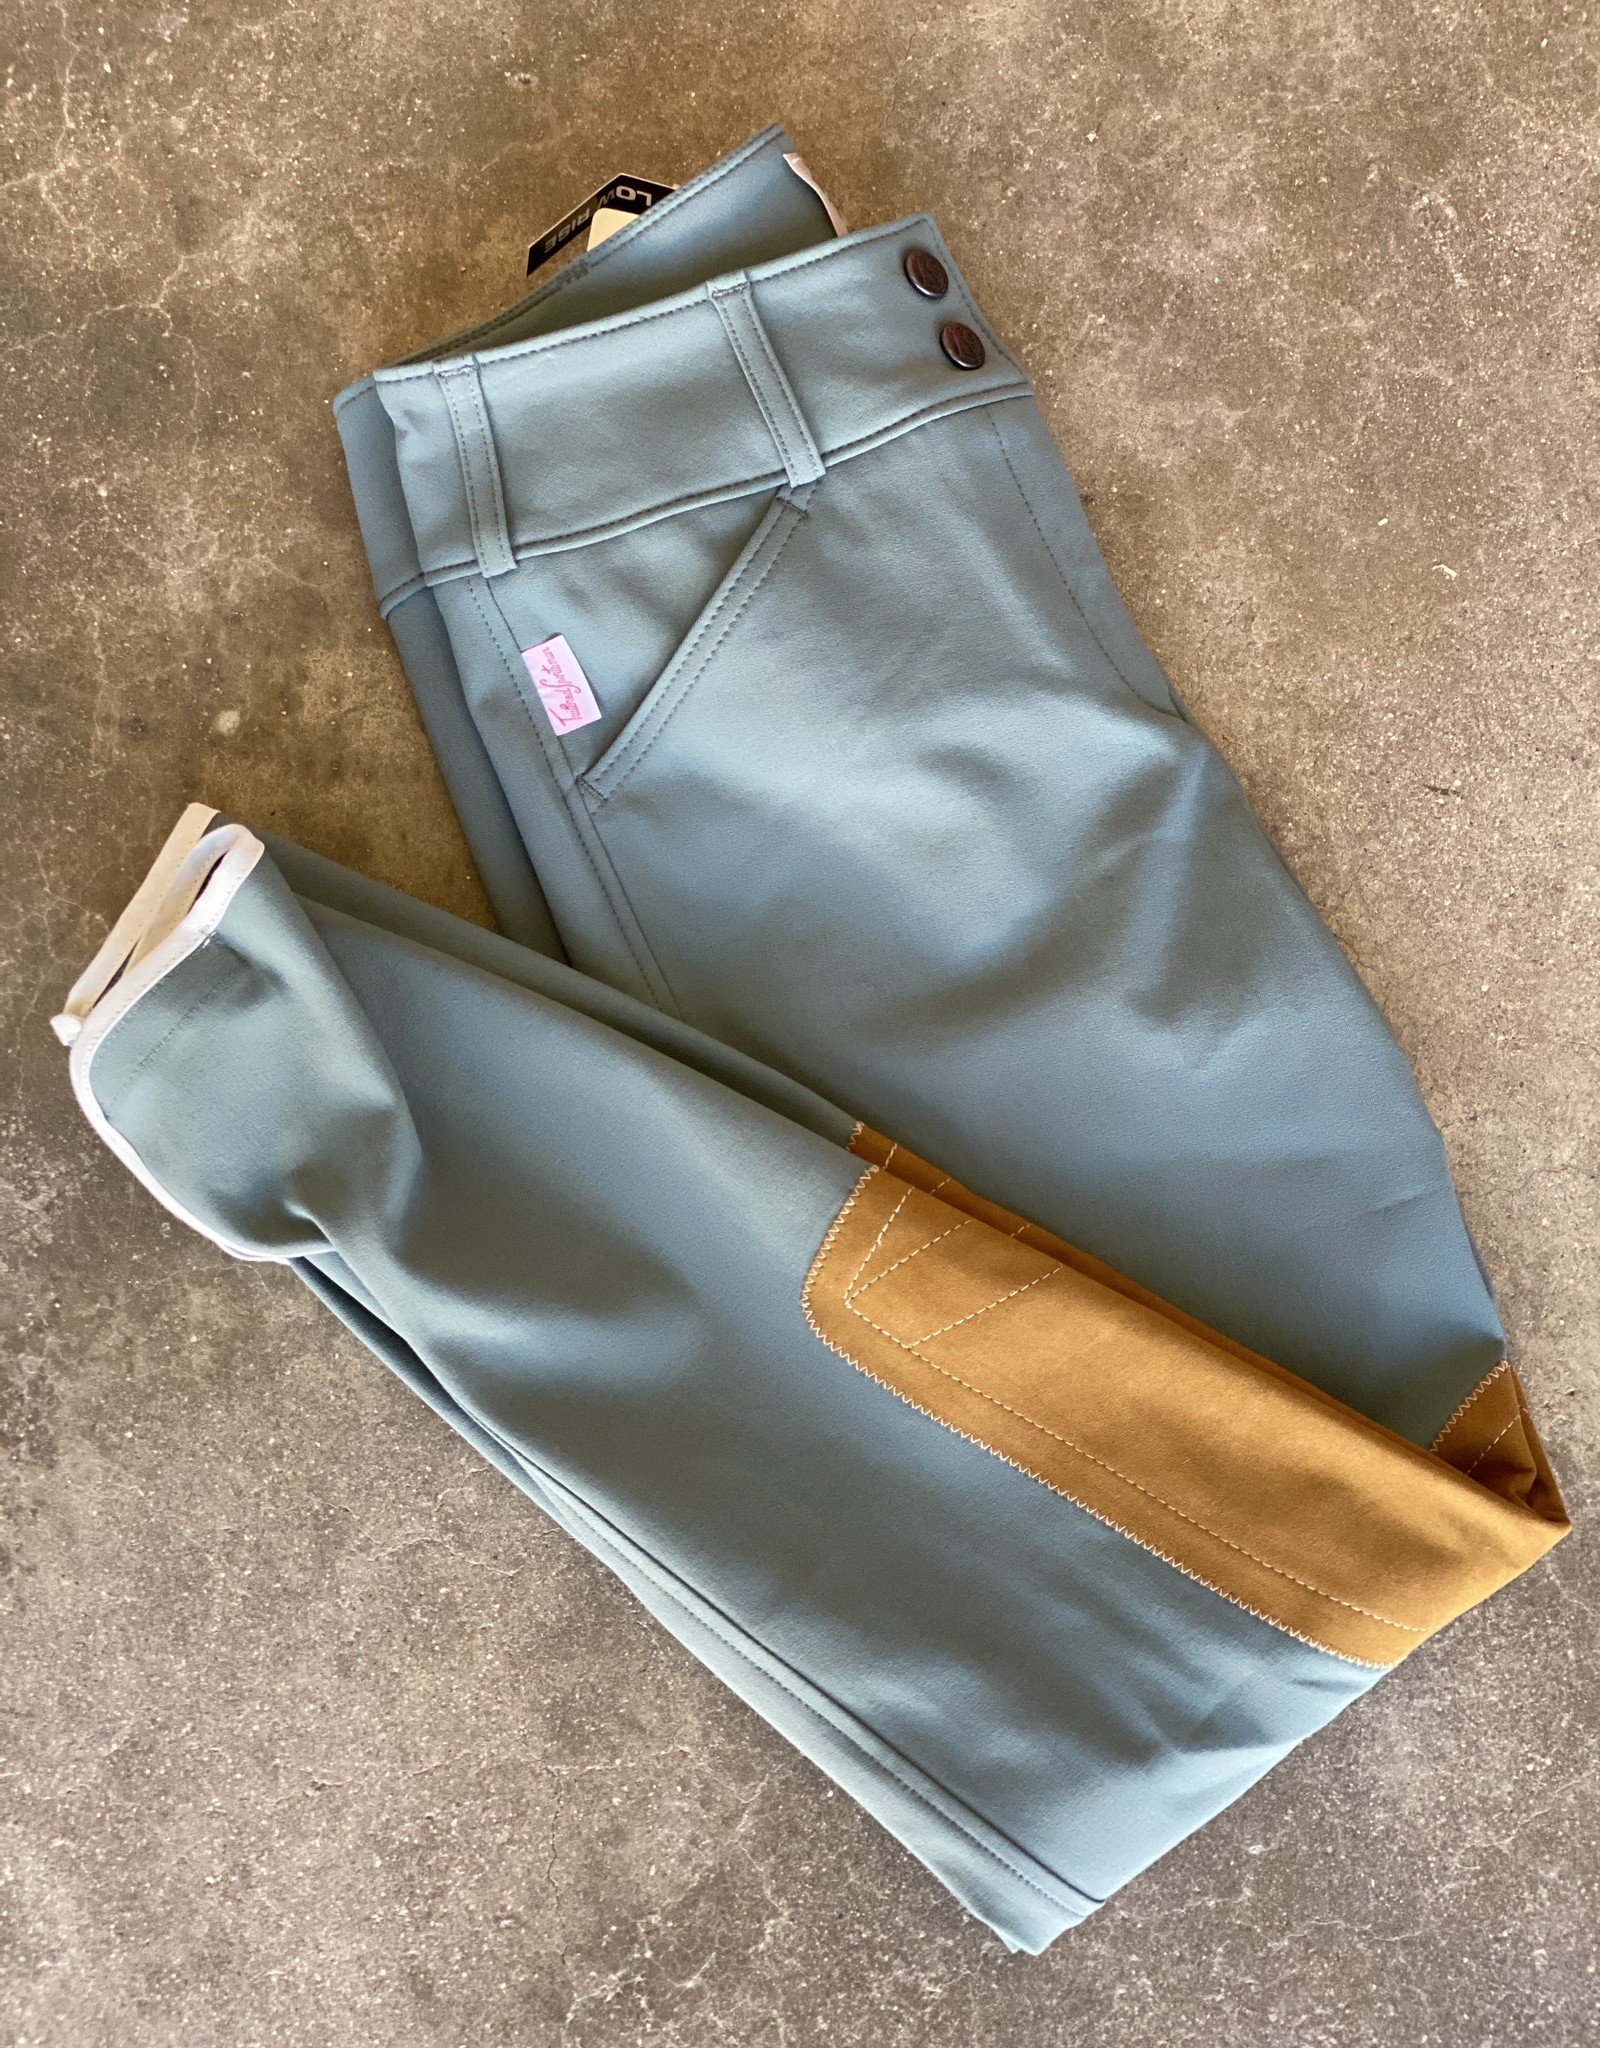 Tailored Sportsman Ladies' Low Rise Vintage Trophy Hunter Breeches